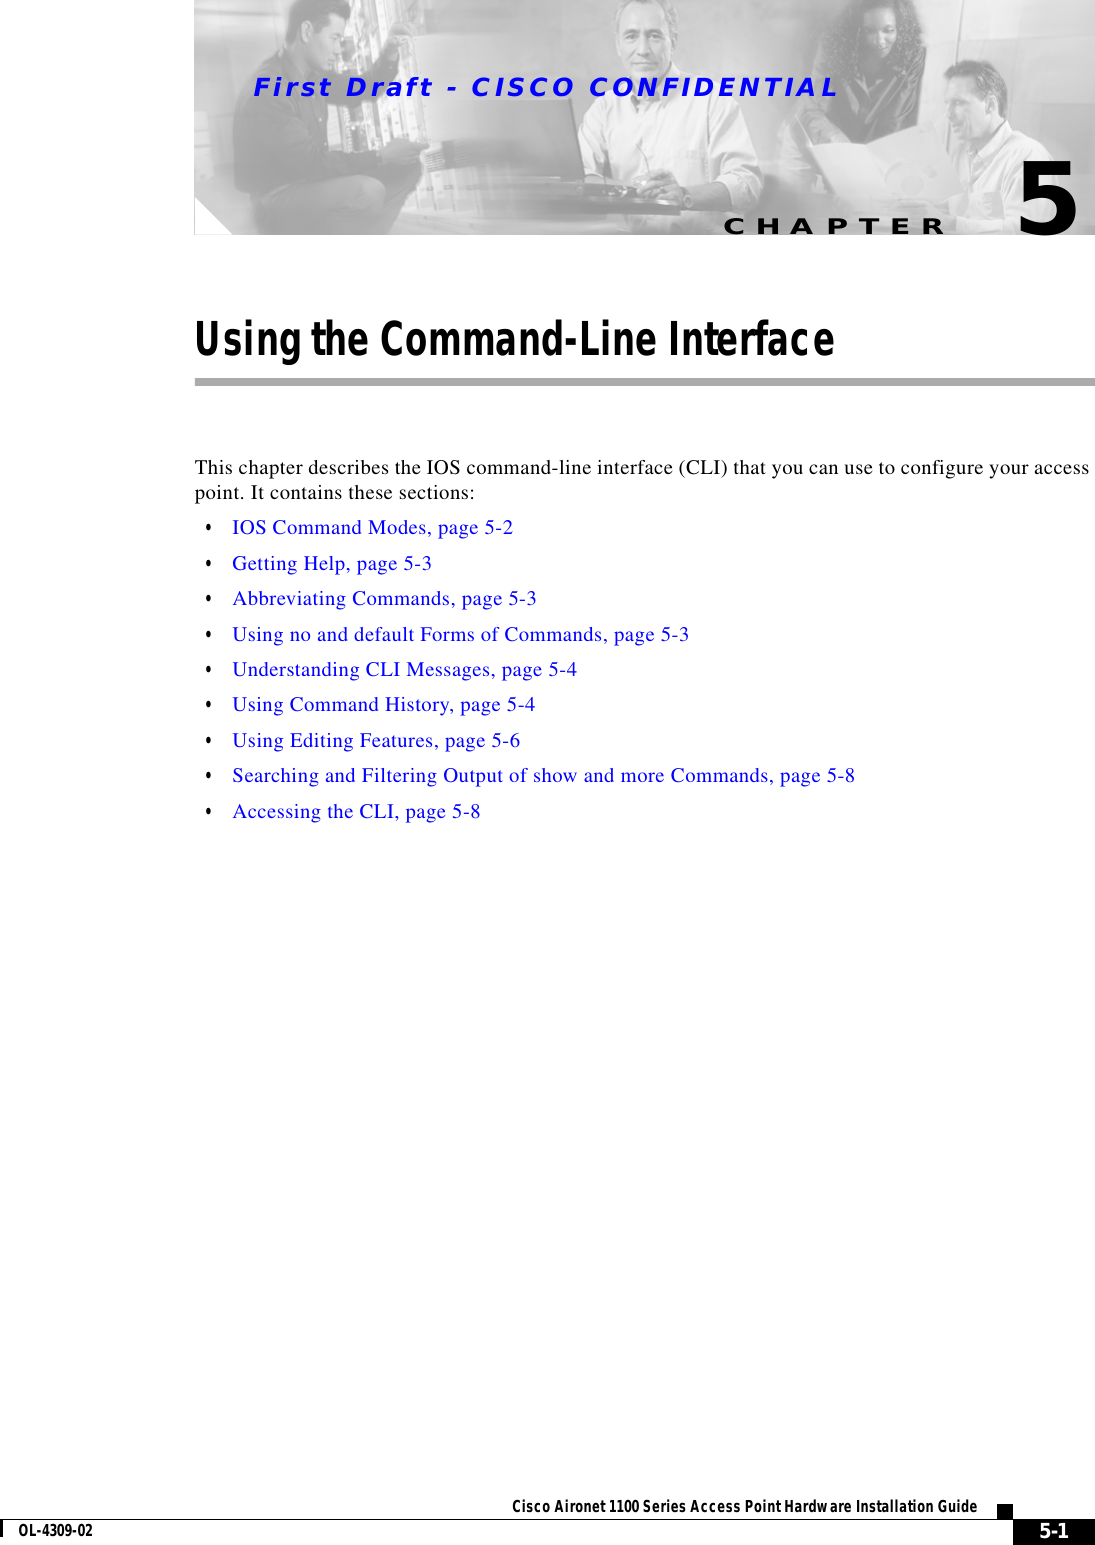 CHAPTERFirst Draft - CISCO CONFIDENTIAL5-1Cisco Aironet 1100 Series Access Point Hardware Installation GuideOL-4309-025Using the Command-Line InterfaceThis chapter describes the IOS command-line interface (CLI) that you can use to configure your access point. It contains these sections:•IOS Command Modes, page 5-2•Getting Help, page 5-3•Abbreviating Commands, page 5-3•Using no and default Forms of Commands, page 5-3•Understanding CLI Messages, page 5-4•Using Command History, page 5-4•Using Editing Features, page 5-6•Searching and Filtering Output of show and more Commands, page 5-8•Accessing the CLI, page 5-8